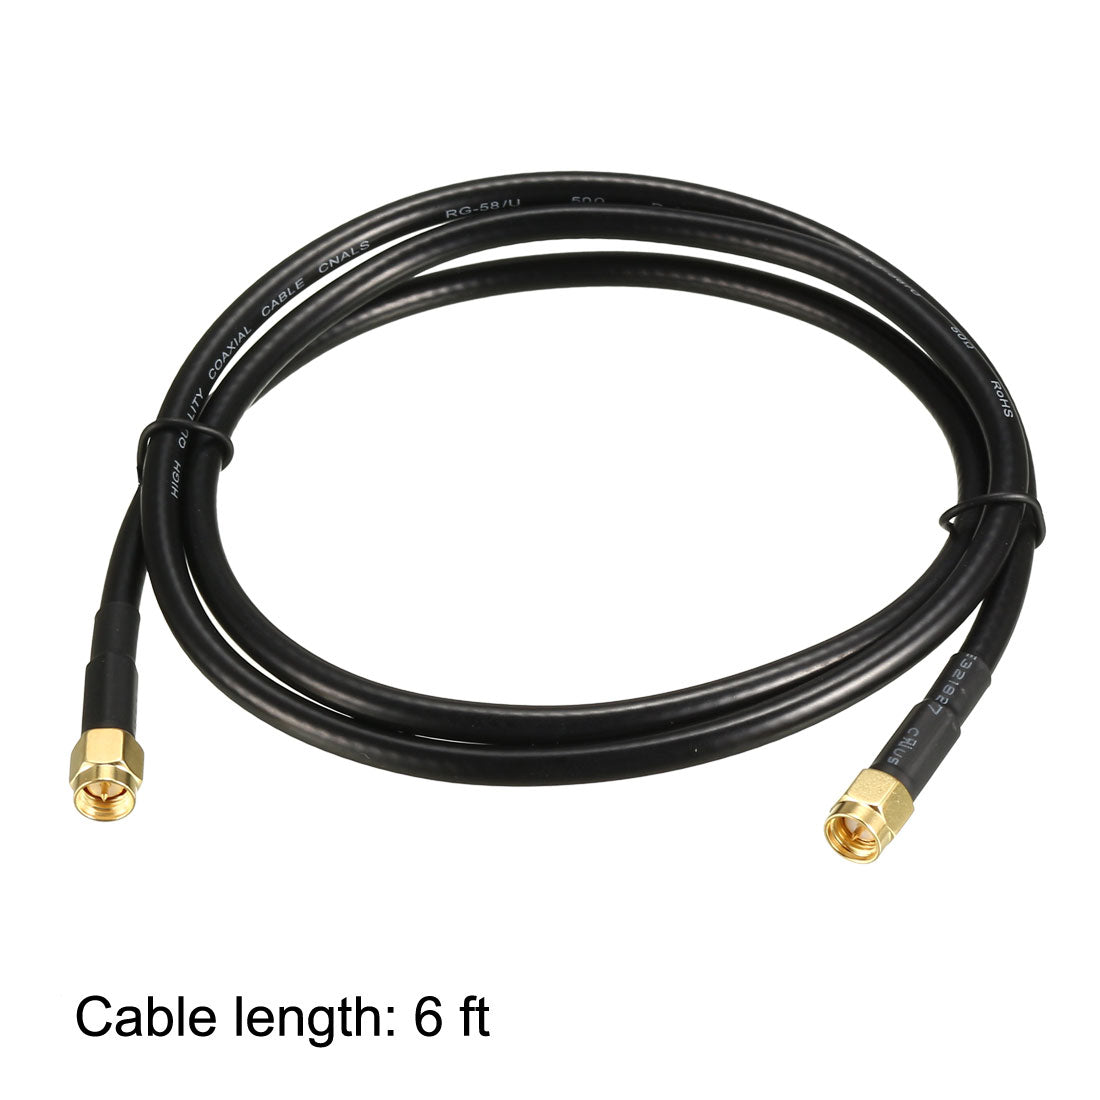 uxcell Uxcell Antenna Extension Cable SMA Male to SMA Male Coaxial Cable RG58 50 Ohm 2pcs